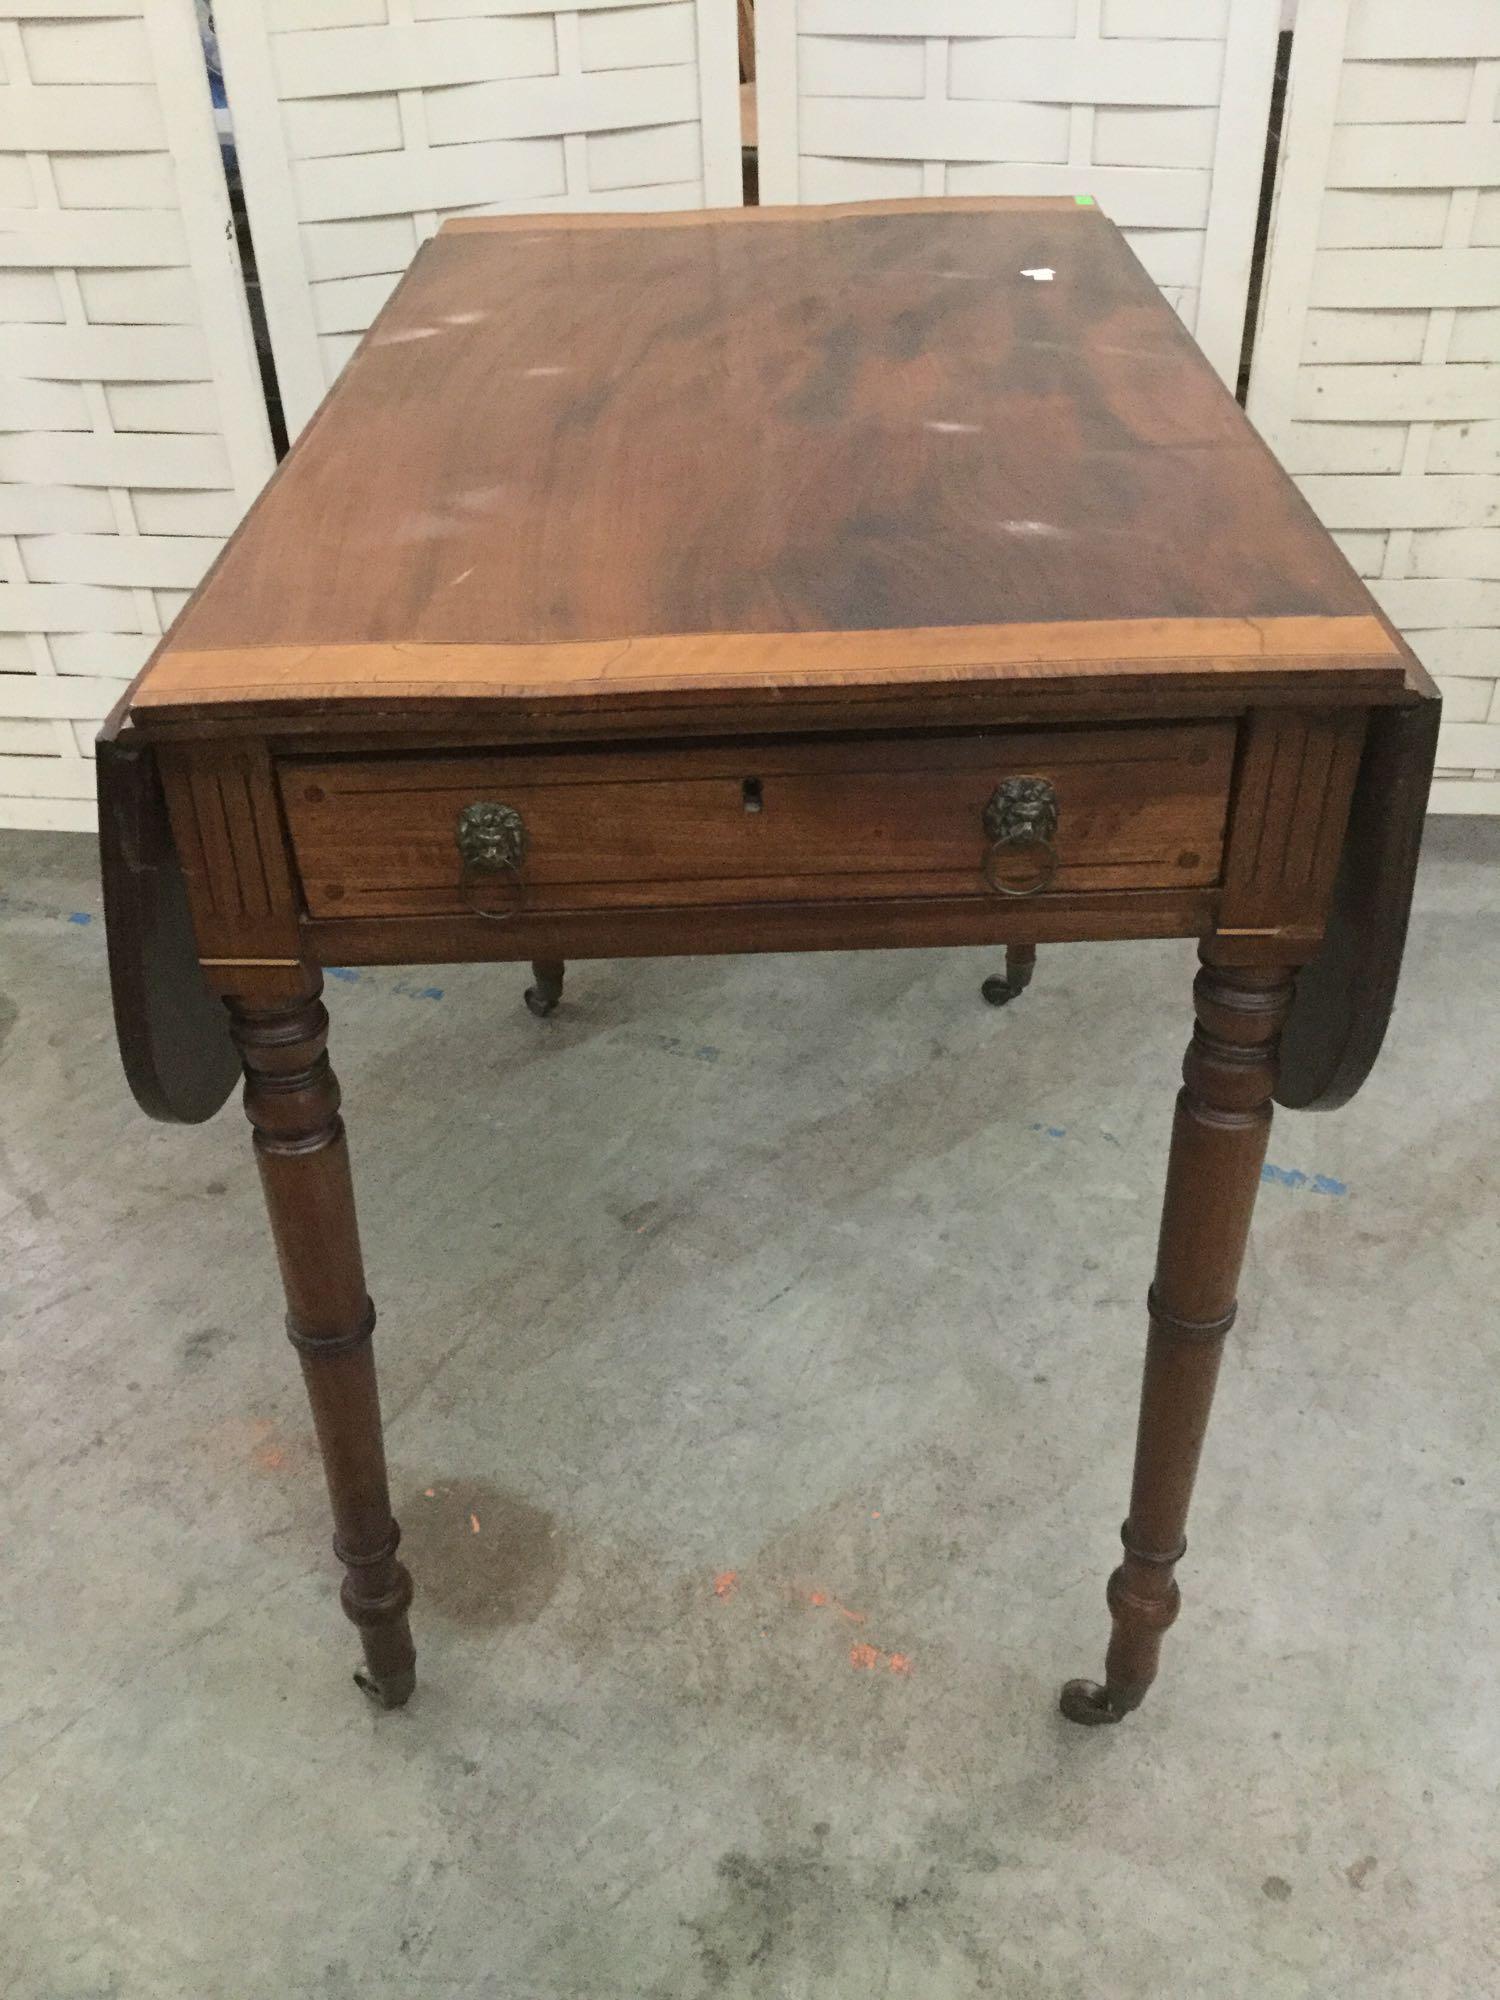 Antique drop leaf side table with drawer, lion head drawer pulls, and casters